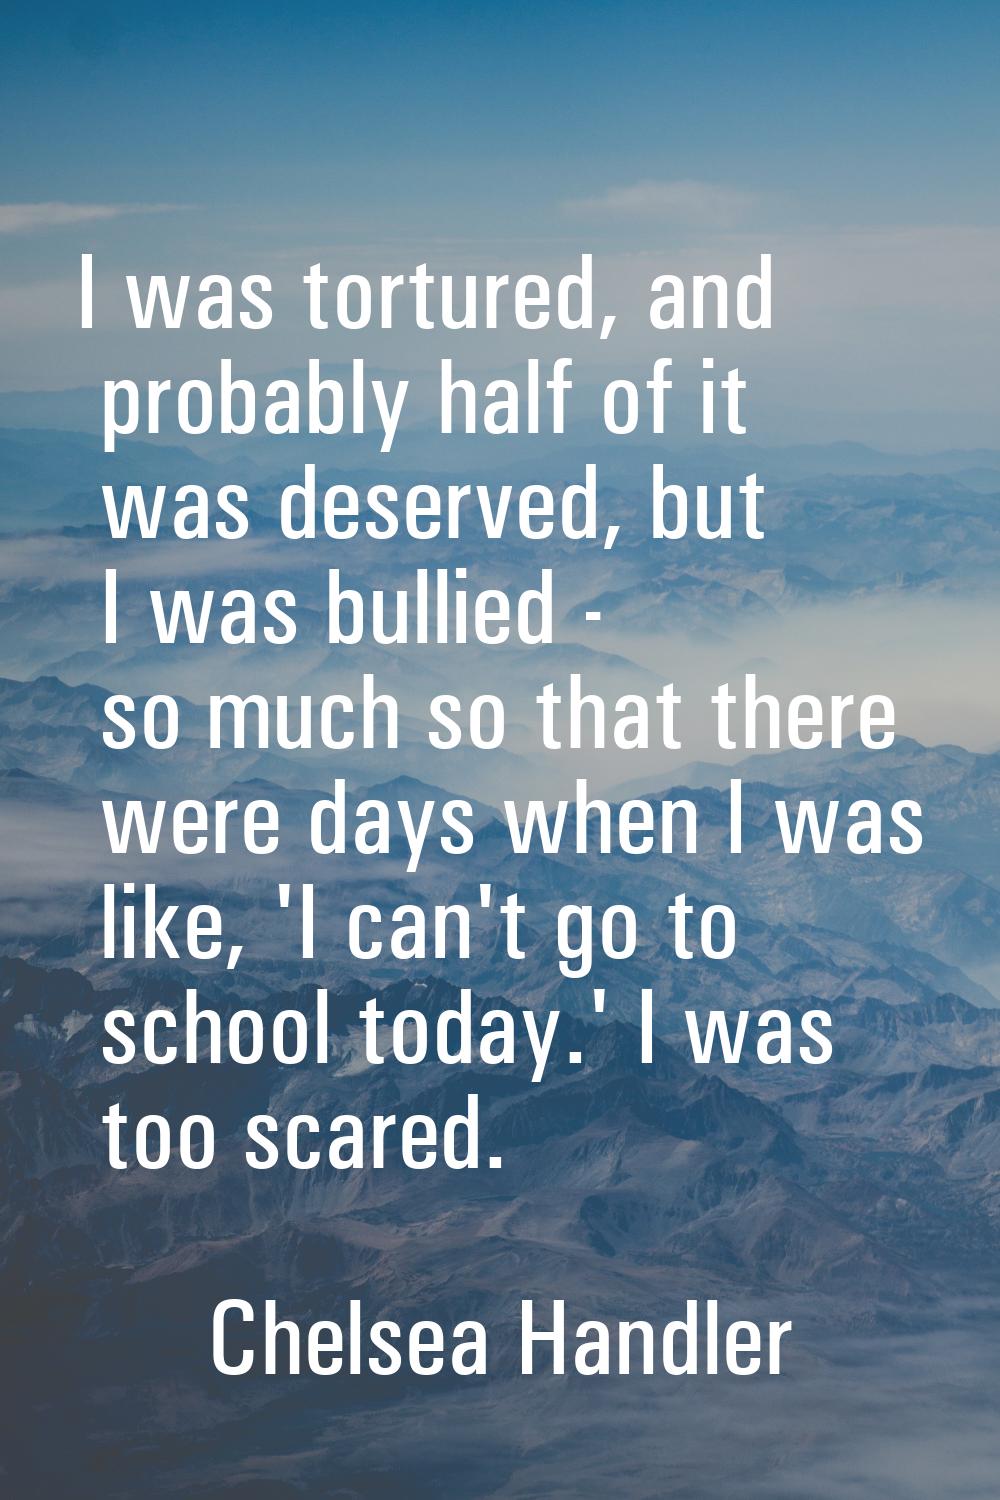 I was tortured, and probably half of it was deserved, but I was bullied - so much so that there wer